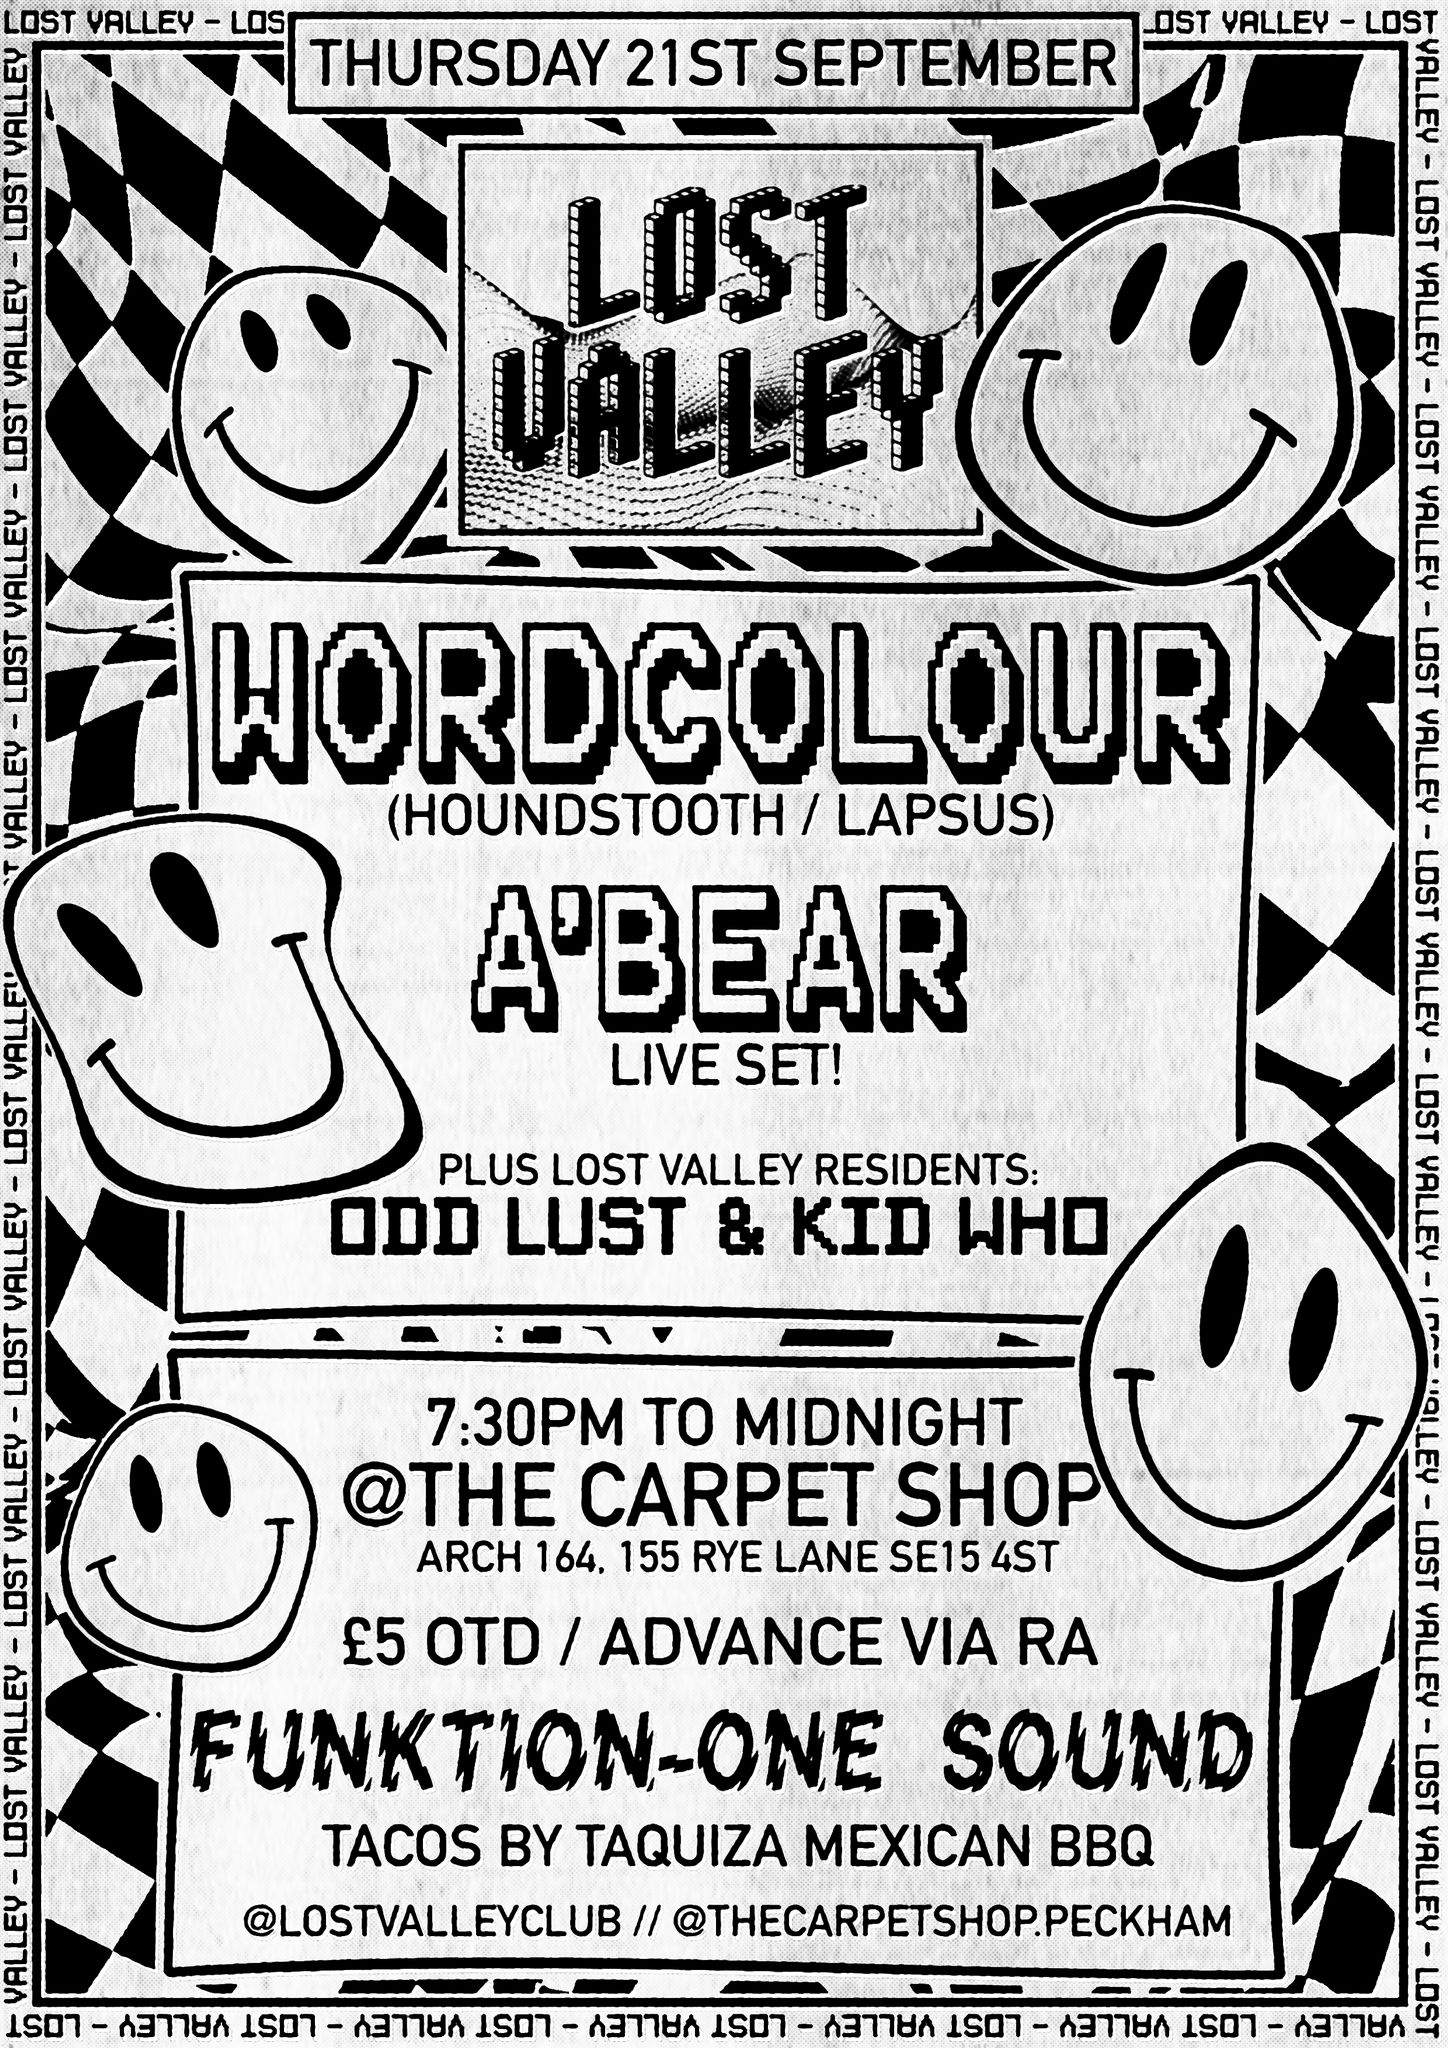 Lost Valley with Wordcolour and A'Bear Live - Página frontal